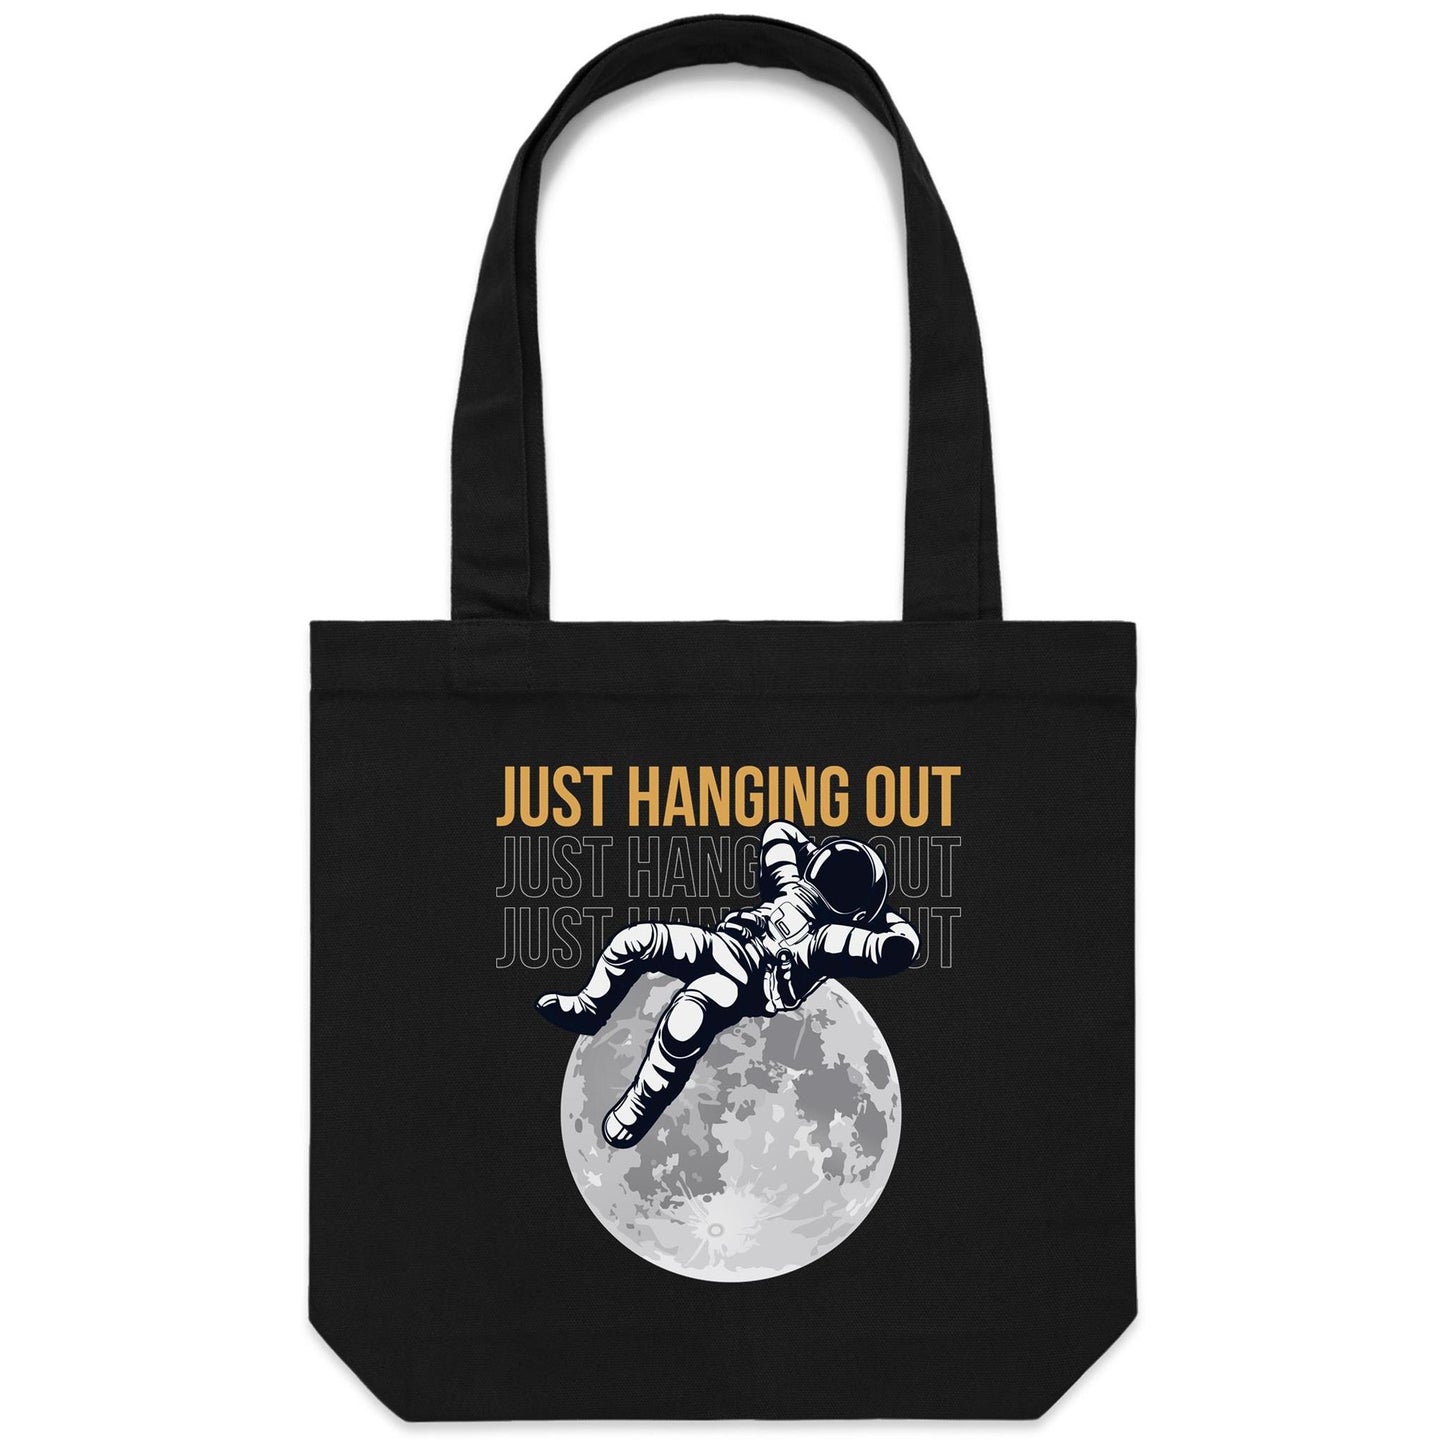 Just Hanging Out - Canvas Tote Bag Default Title Tote Bag Space